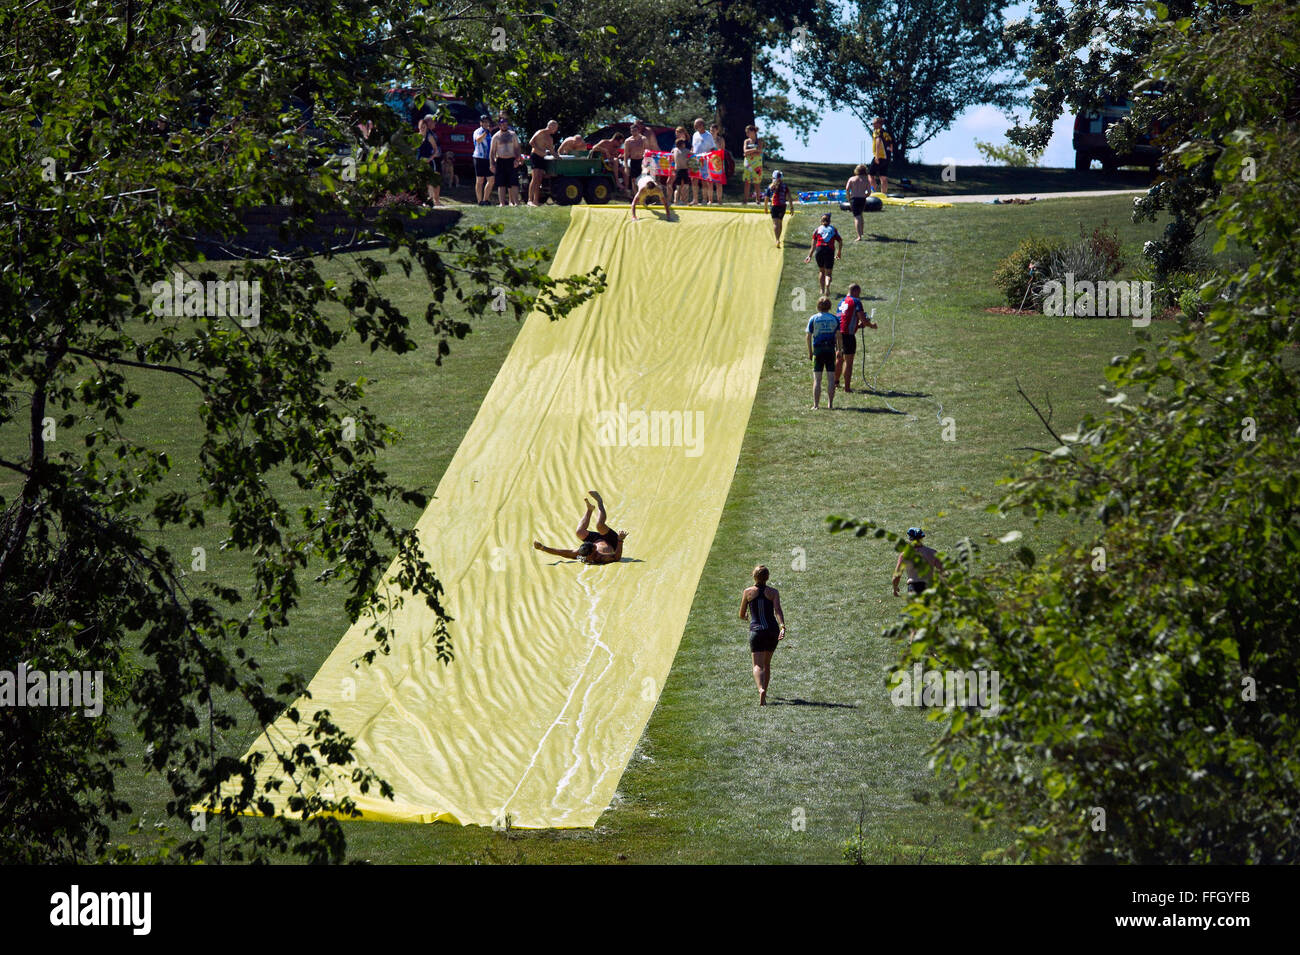 RAGBRAI participants stop at a giant makeshift water slide along the route from Cedar Rapids to Anamosa, Iowa. It’s not all about cycling at RAGBRAI but also having fun and meeting new people. Stock Photo